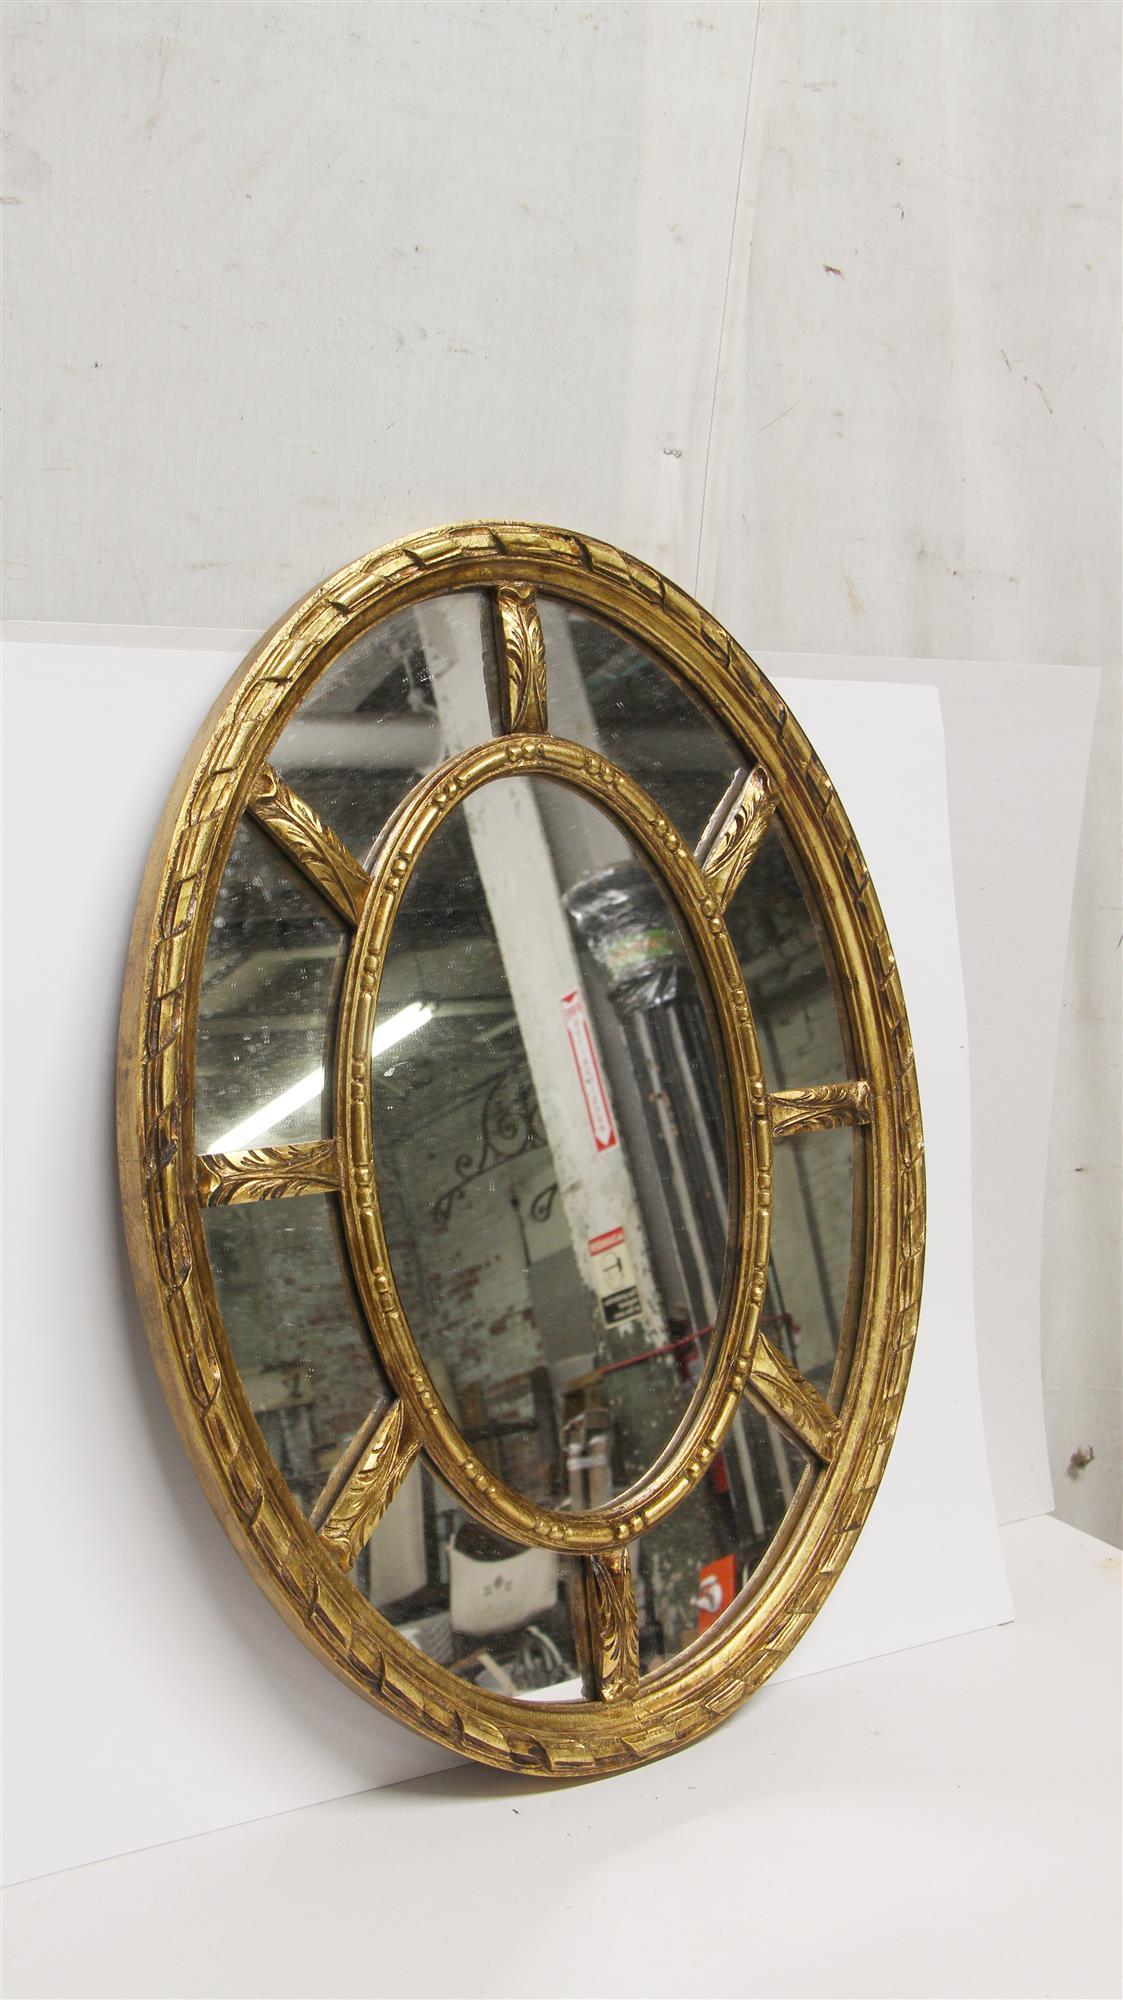 1950s French oval shaped wall-mounted mirror with a gilded frame. This can be seen at our 333 West 52nd St location in the Theater District West of Manhattan.